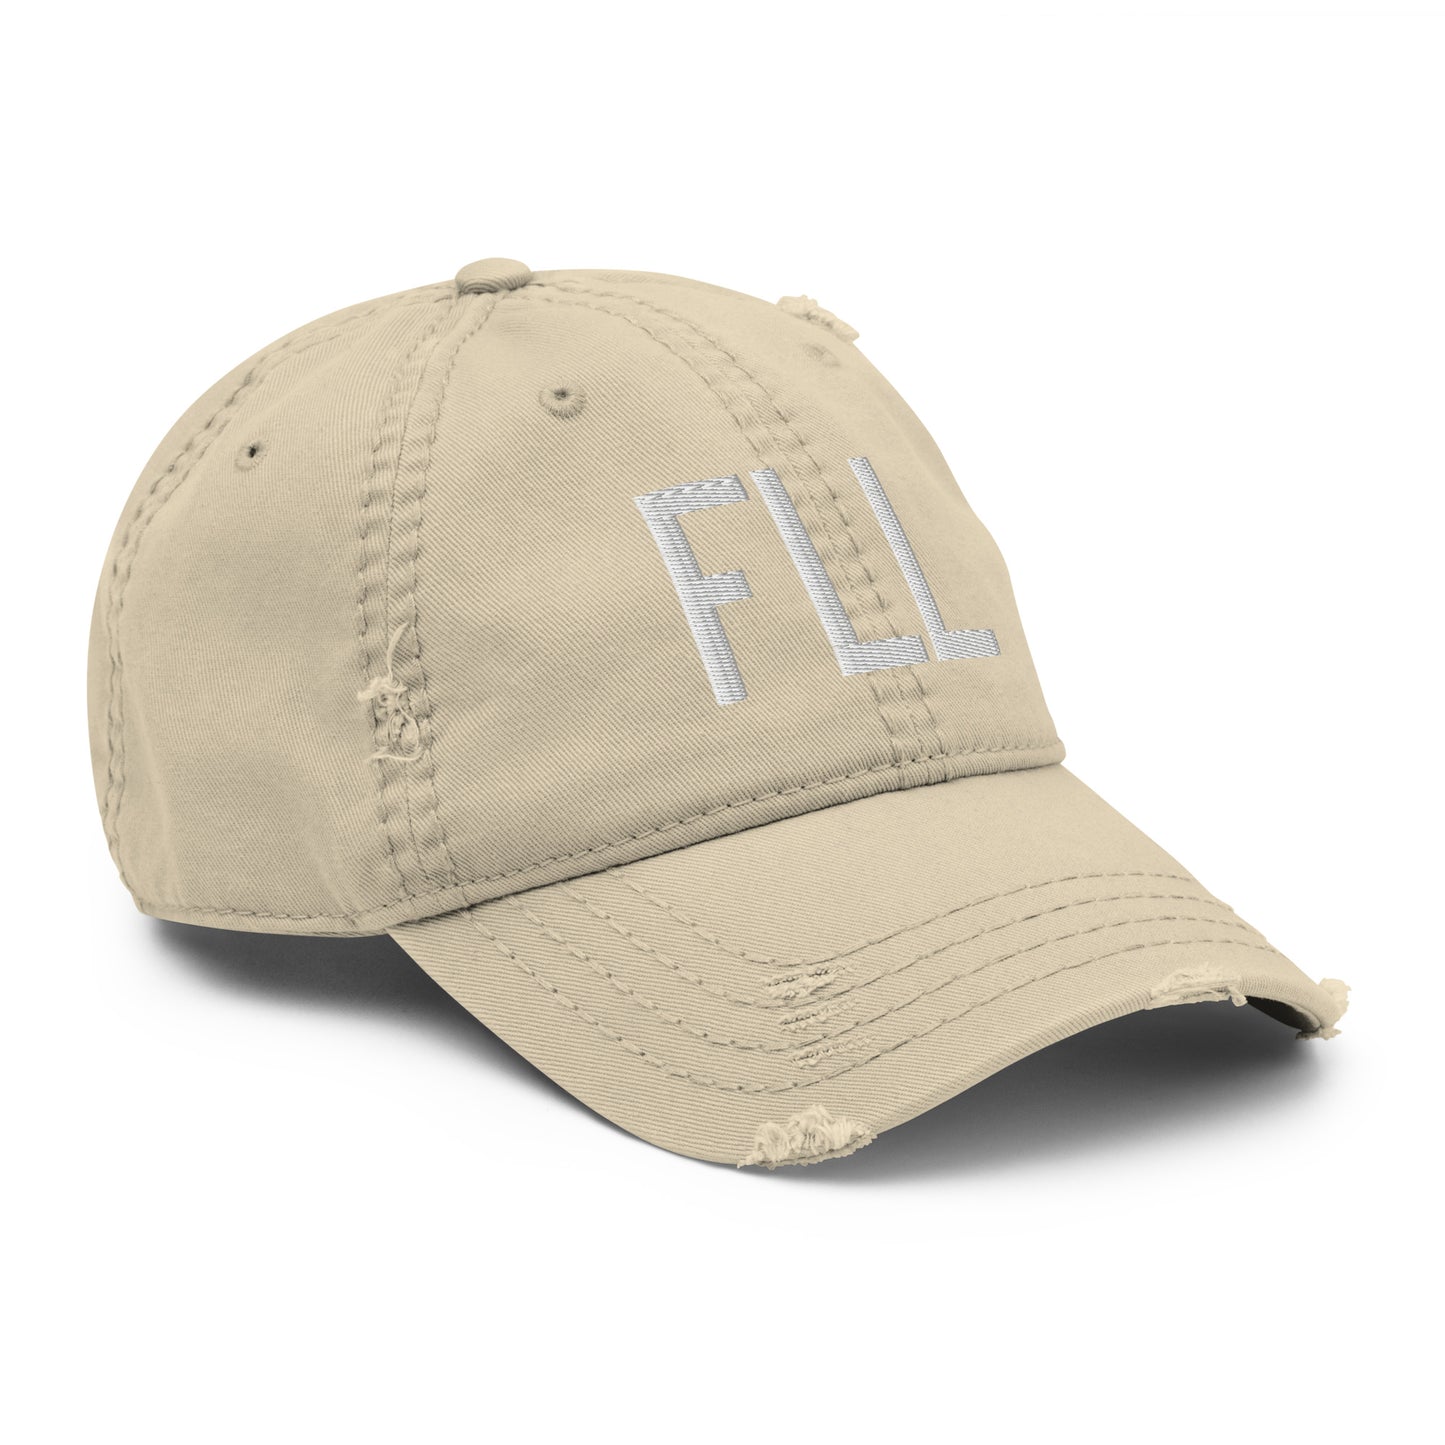 Airport Code Distressed Hat - White • FLL Fort Lauderdale • YHM Designs - Image 20